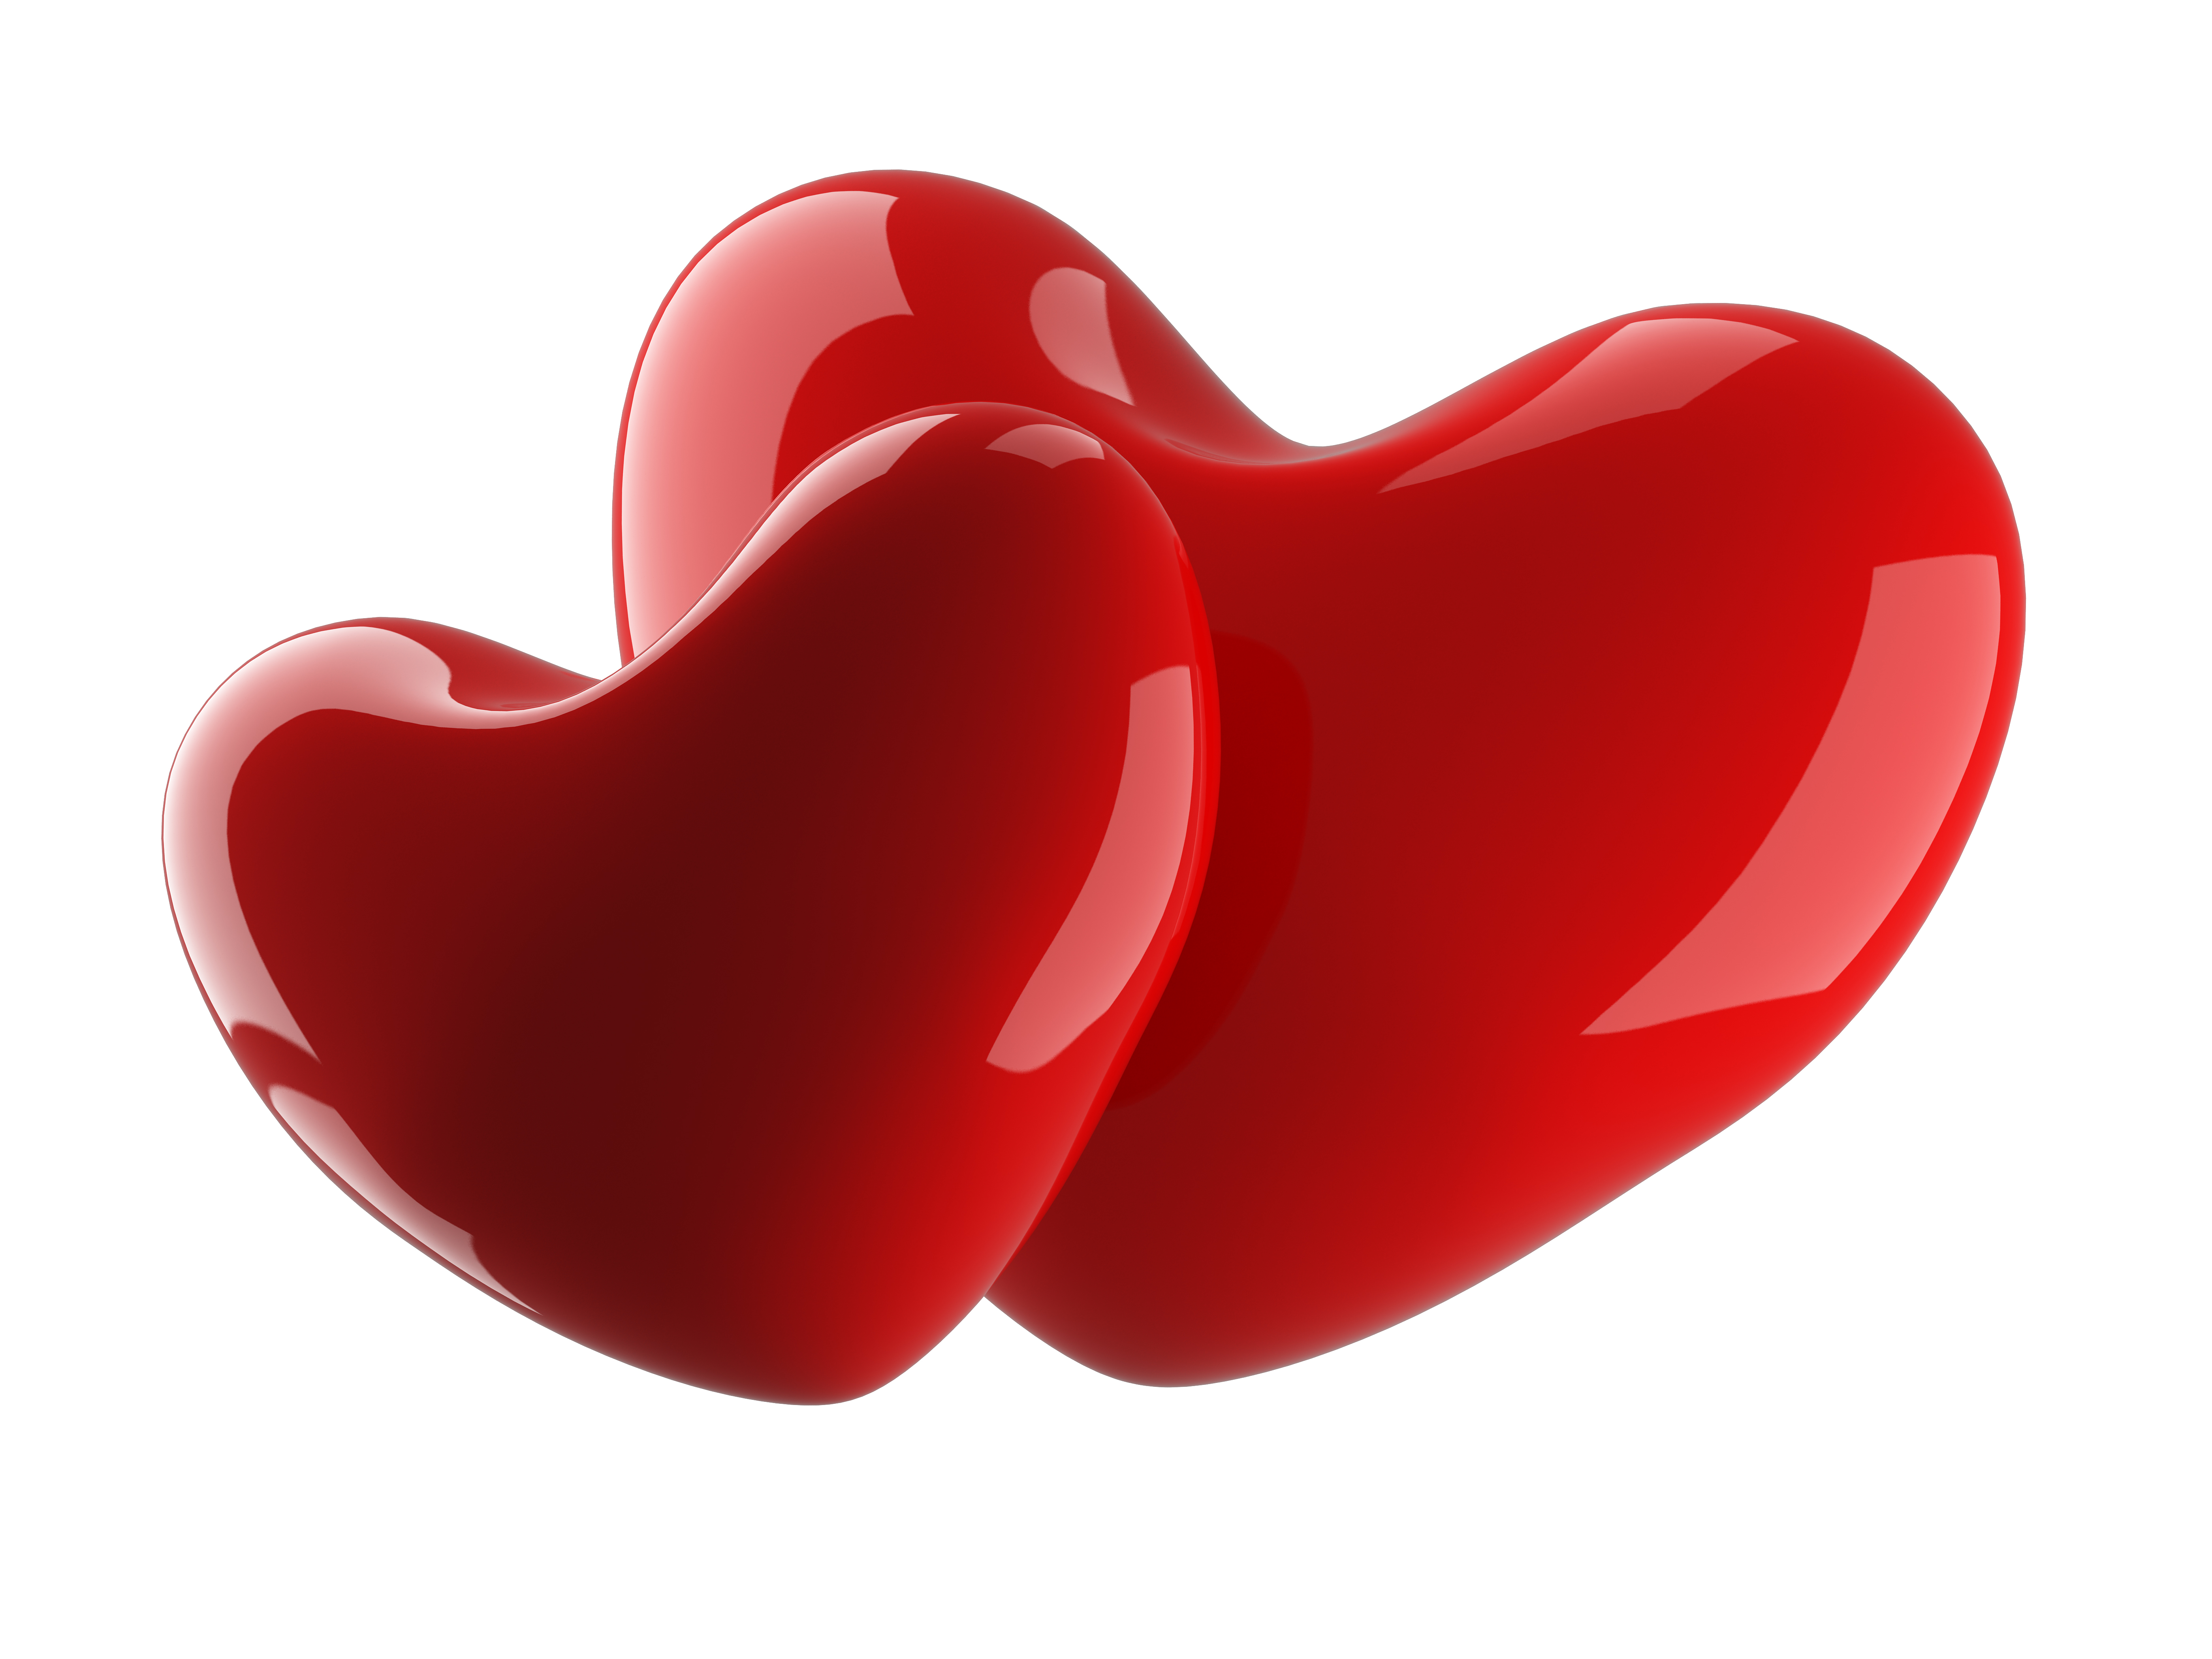 Free 3d Heart Pictures, Download Free Clip Art, Free Clip Art on.